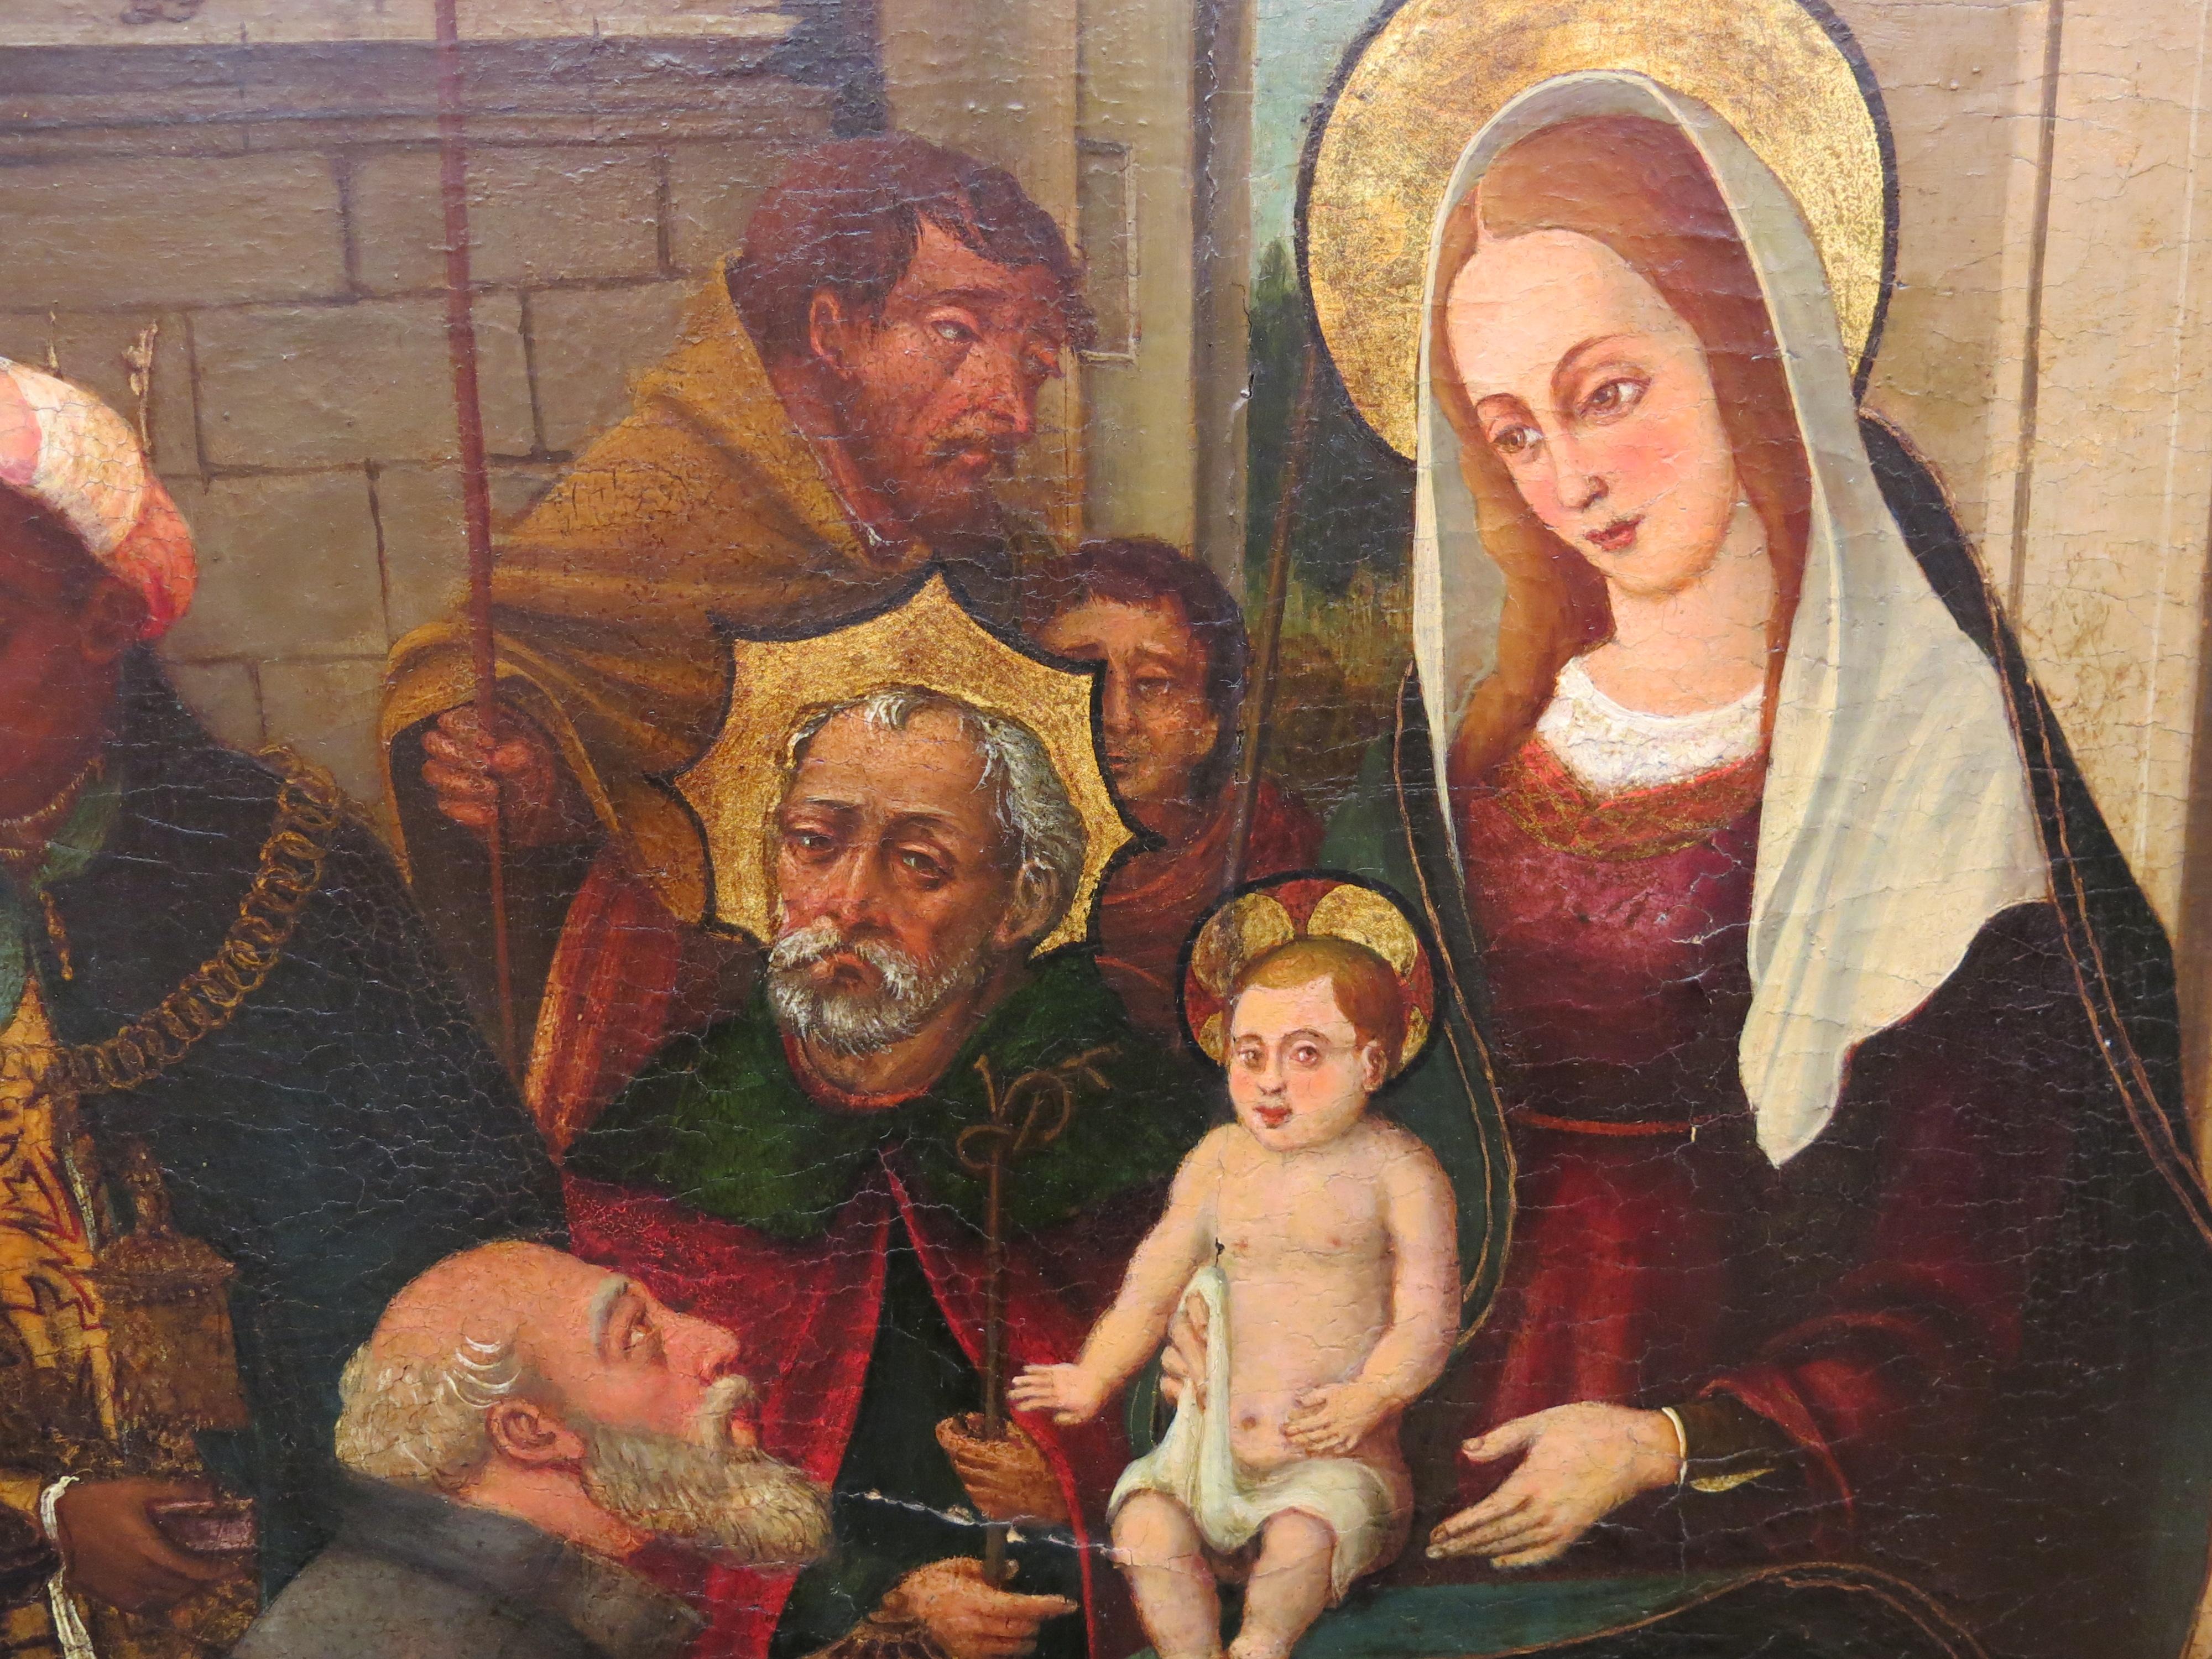 Catalan Baroque S.XVI
The Adoration of the Magi
Oil on wood
92cm x 68cm
Dated 1527

At the beginning of the Renaissance period, Gothic forms coexisted in Catalonia with other new solutions, in which religious fervor was mixed with the